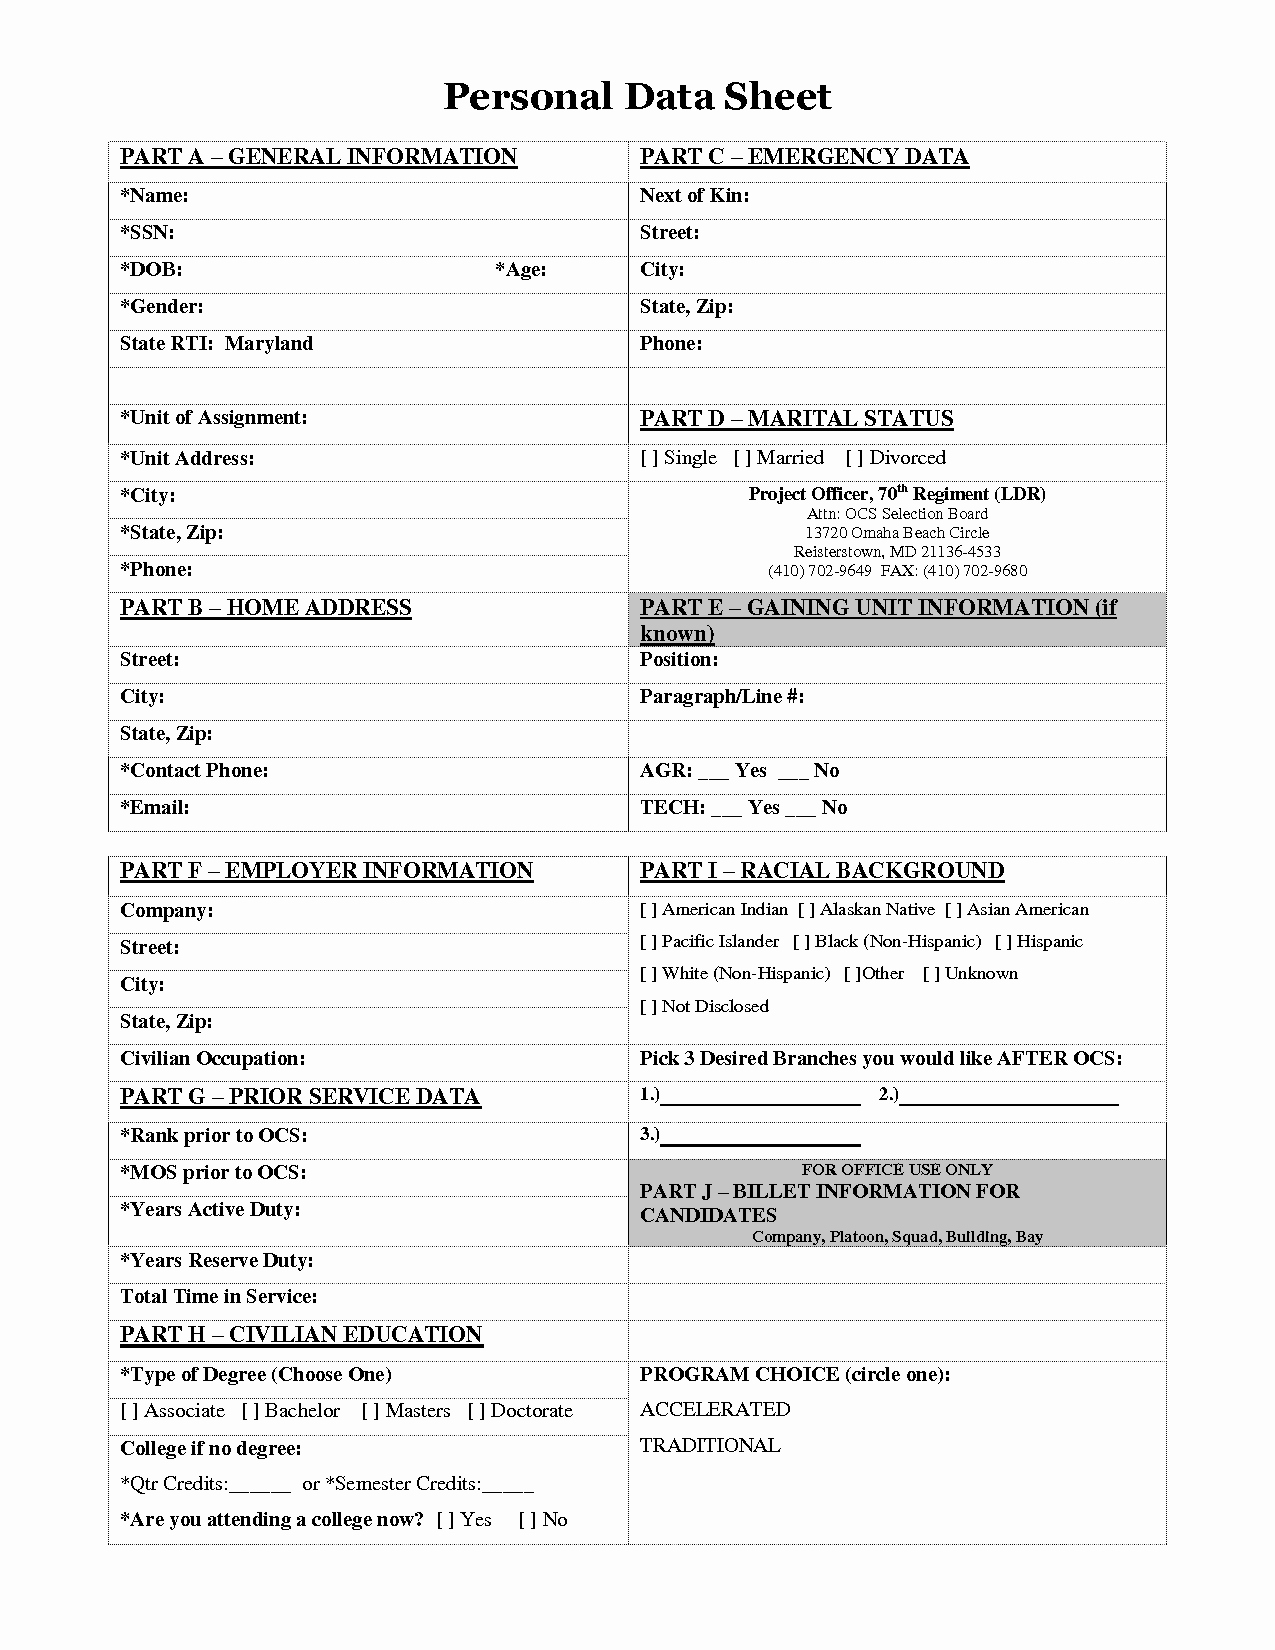 Personal Information Sheet Template Awesome Resume Blank forms to Fill Out with Template Job Sample